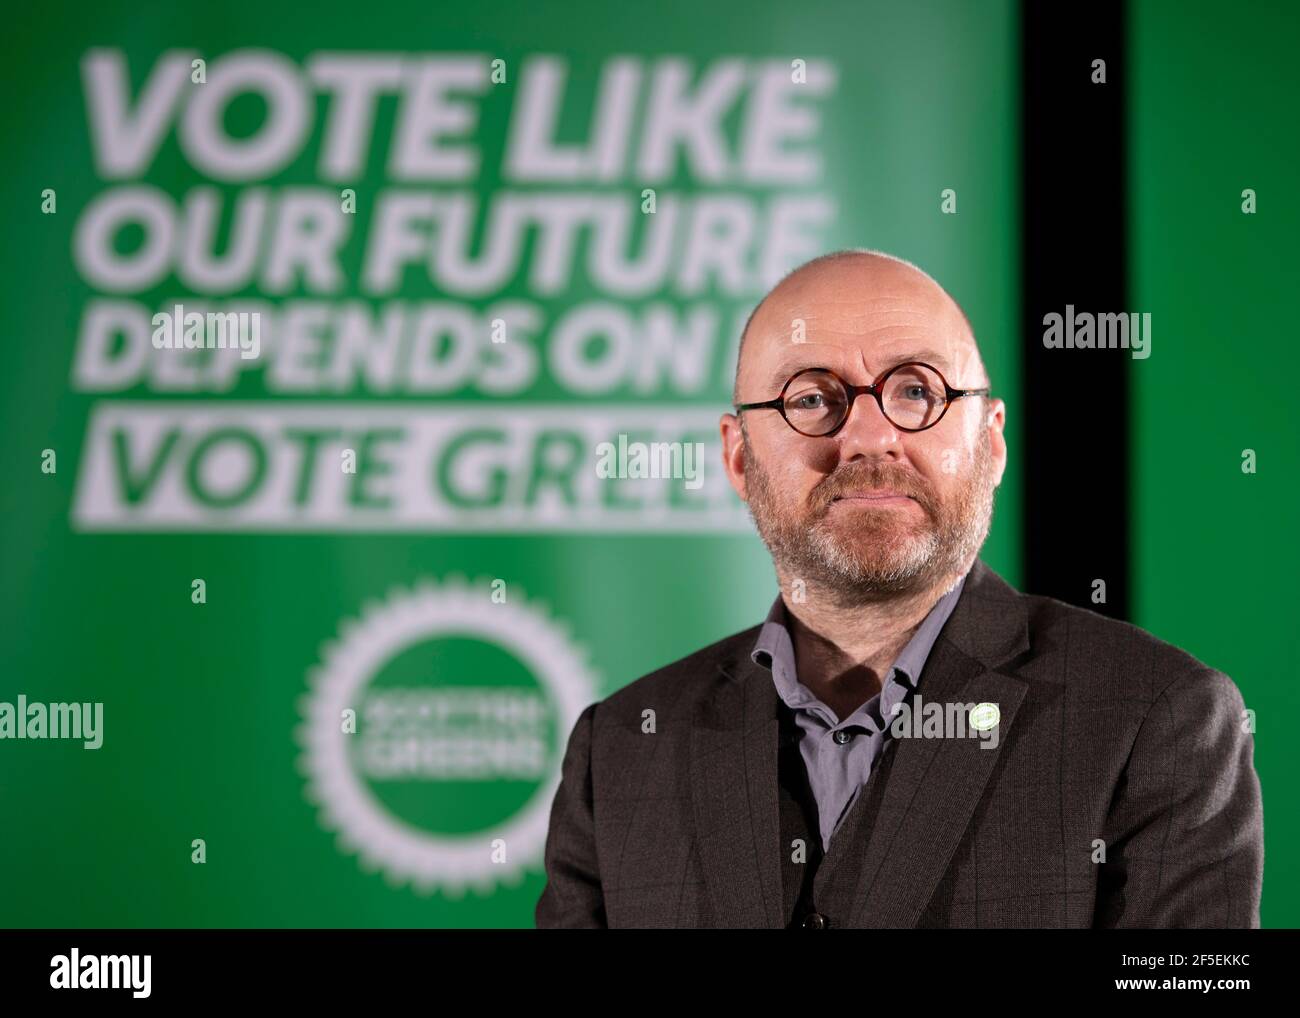 North Queensferry, Scotland, UK. 26 March 2021. PICTURED: Patrick Harvie MSP - Co Leader of the Scottish Green Party. Scottish Greens will today mark the start of their party conference by unveiling an end of term ‘report card' highlighting the party's achievements during the last parliamentary term. Credit: Colin Fisher/Alamy Live News Stock Photo